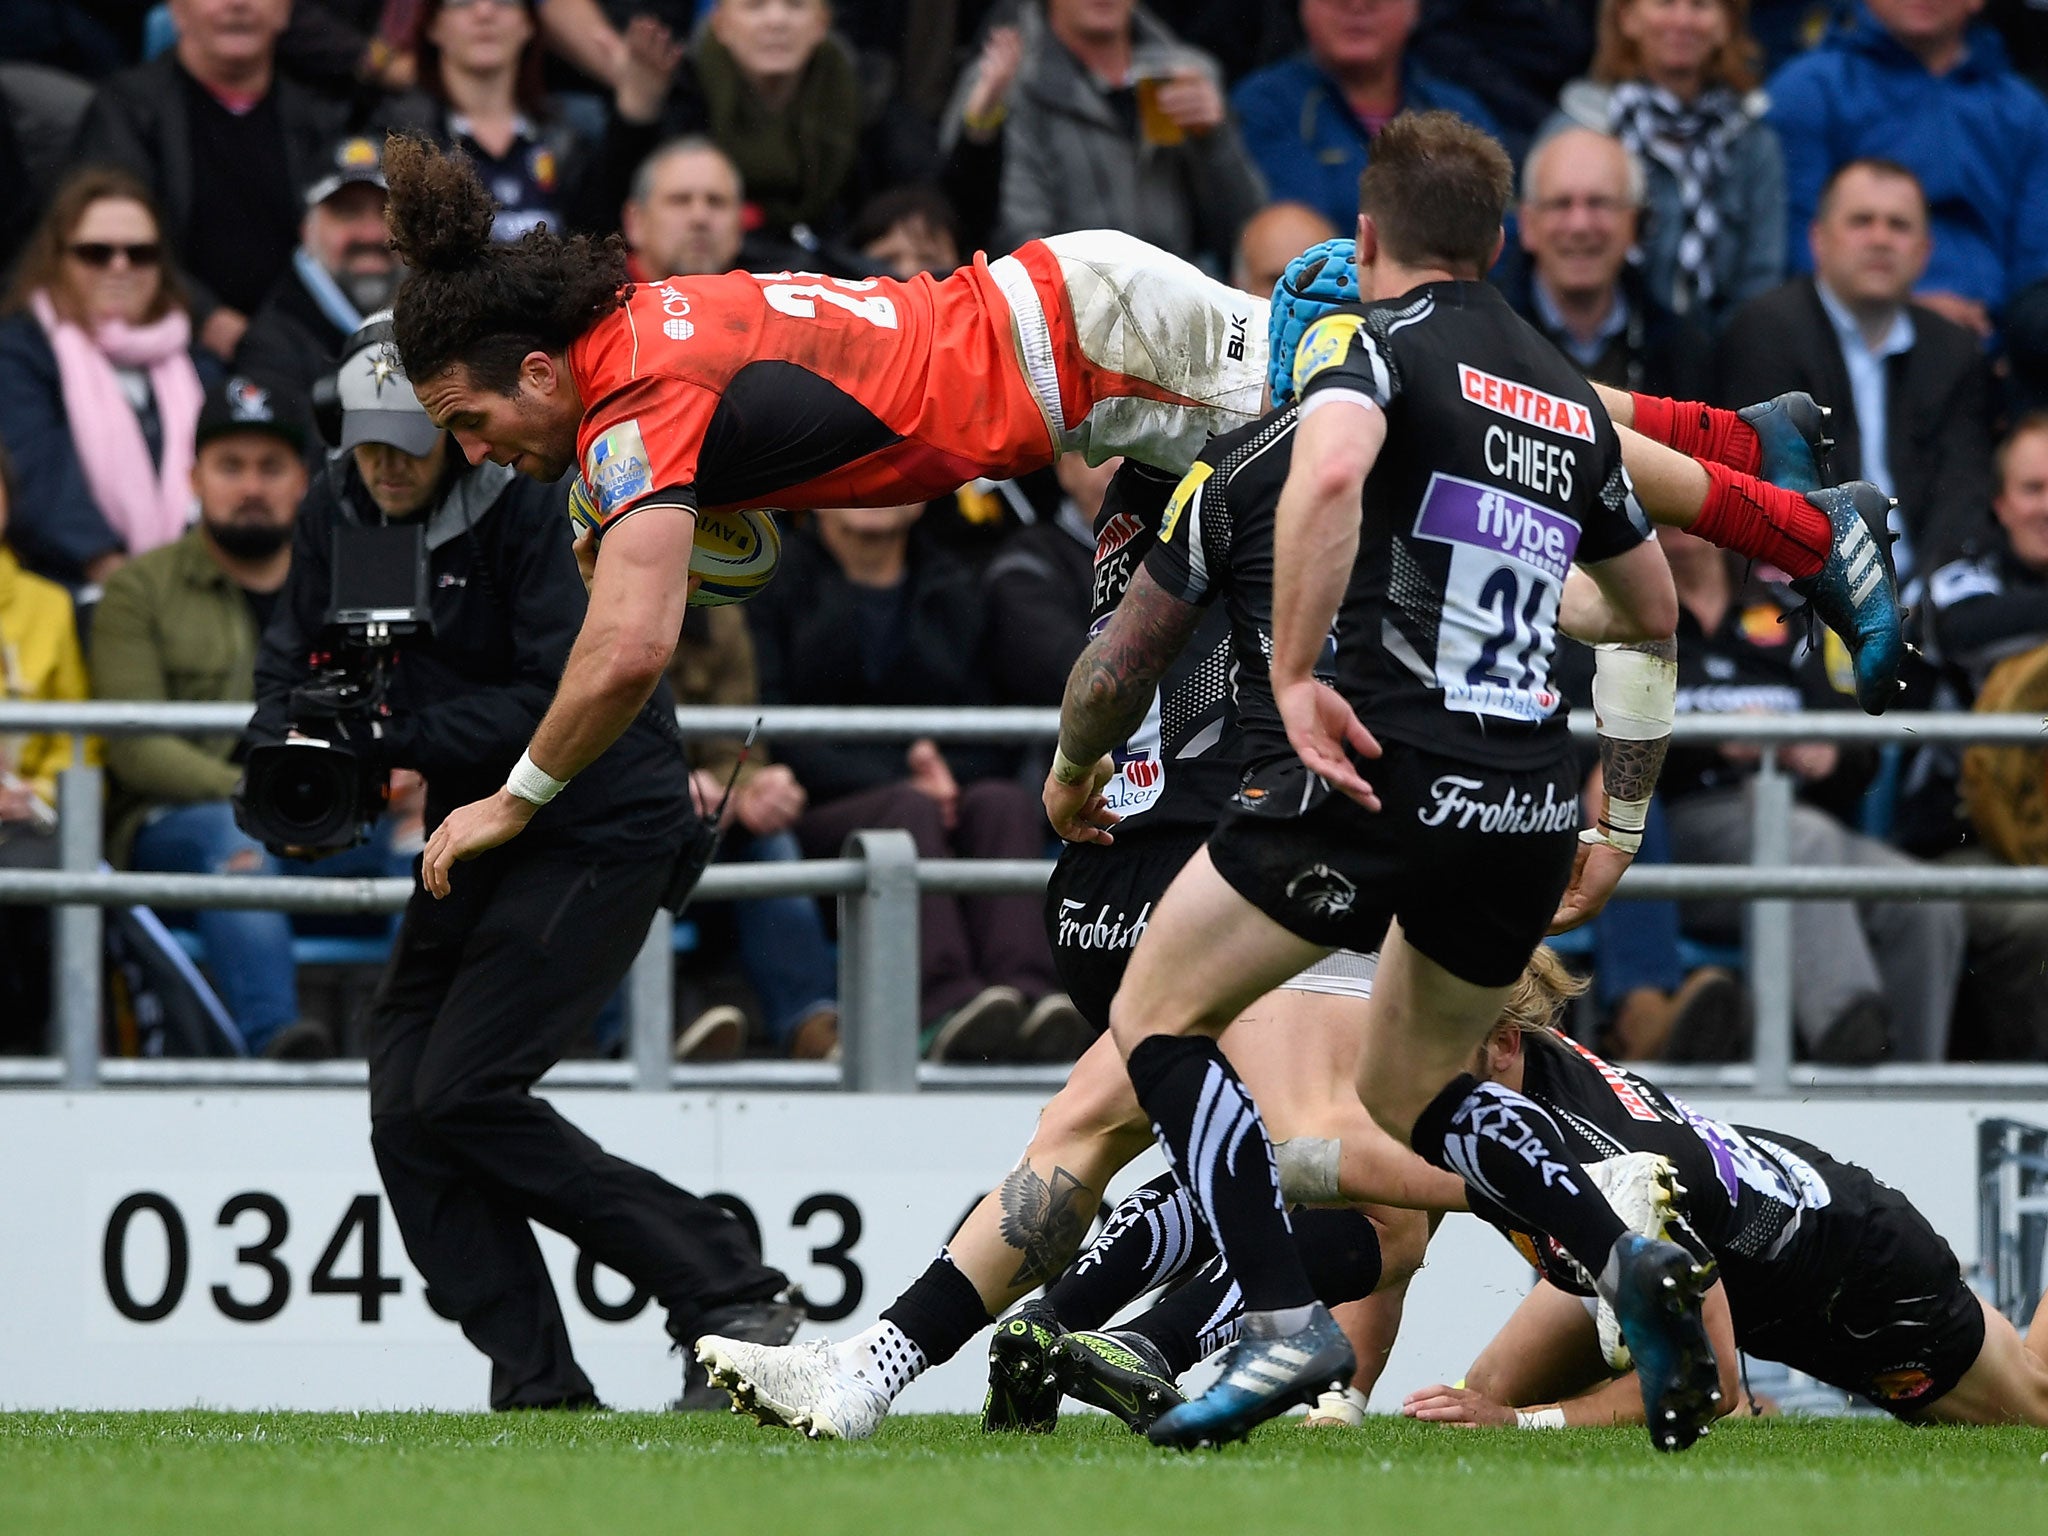 Mike Ellery dives over to score for Saracens